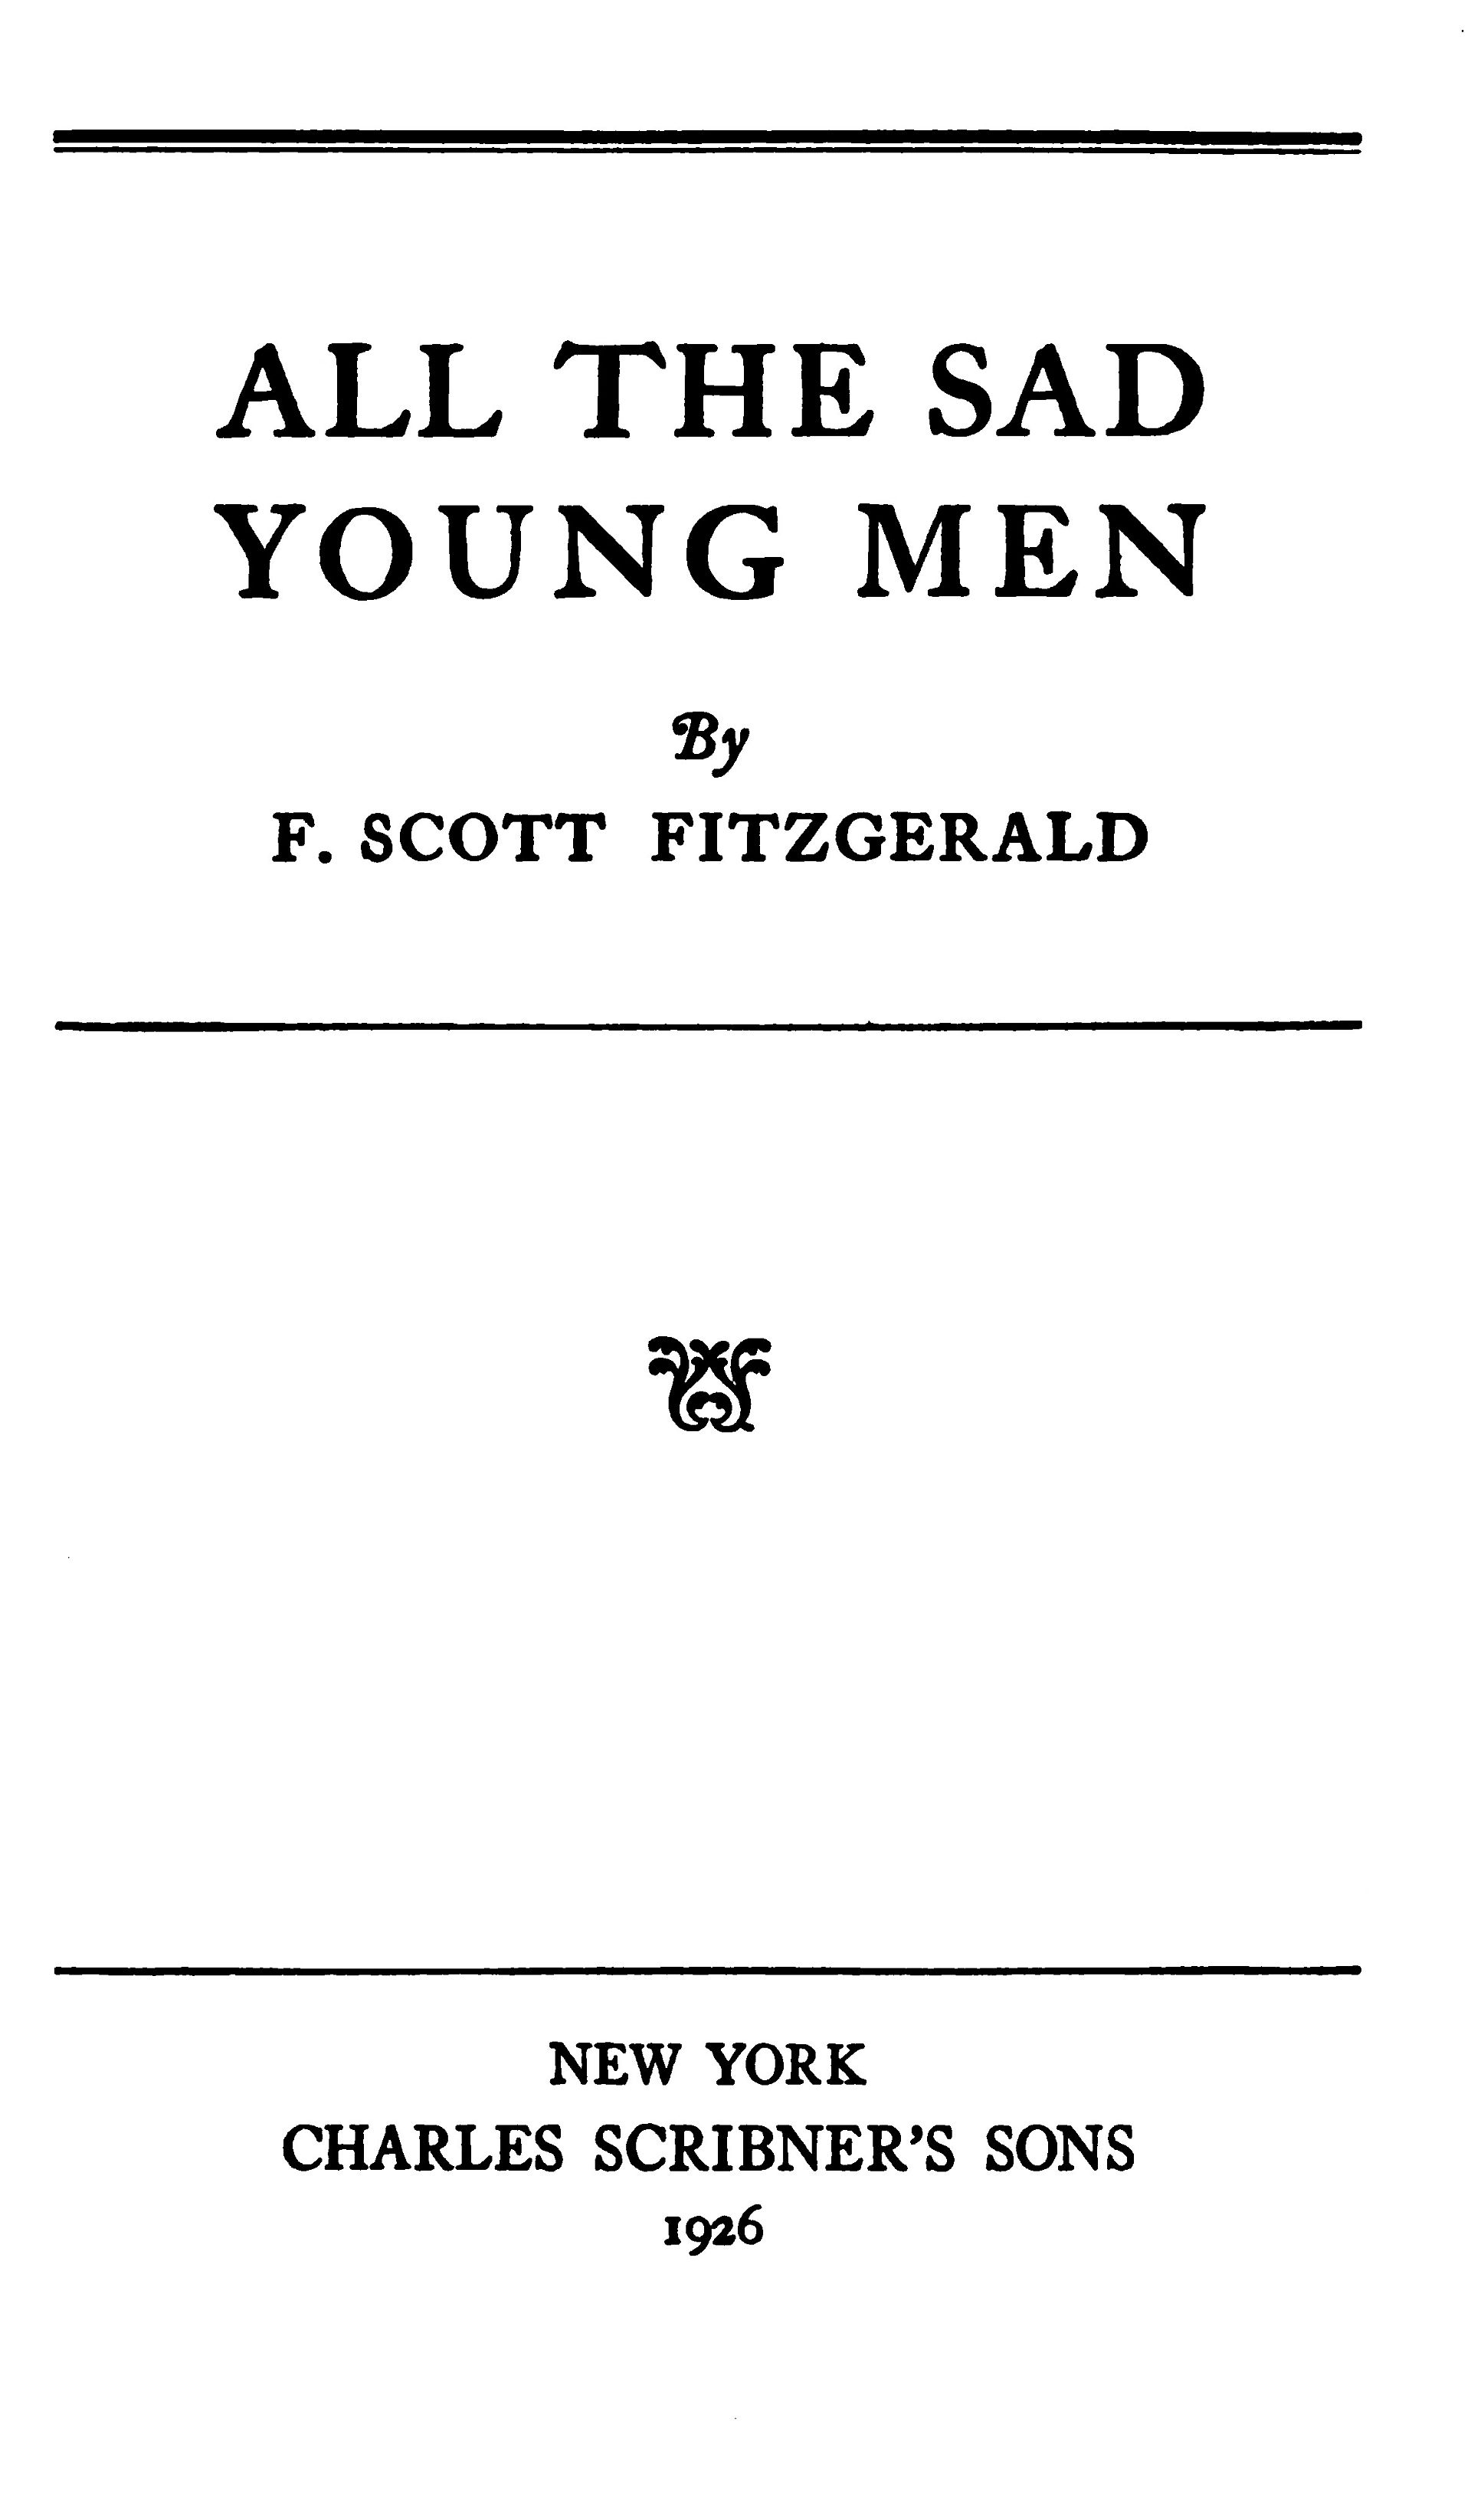 The Project Gutenberg eBook of All the Sad Young Men, by F. Scott  Fitzgerald.